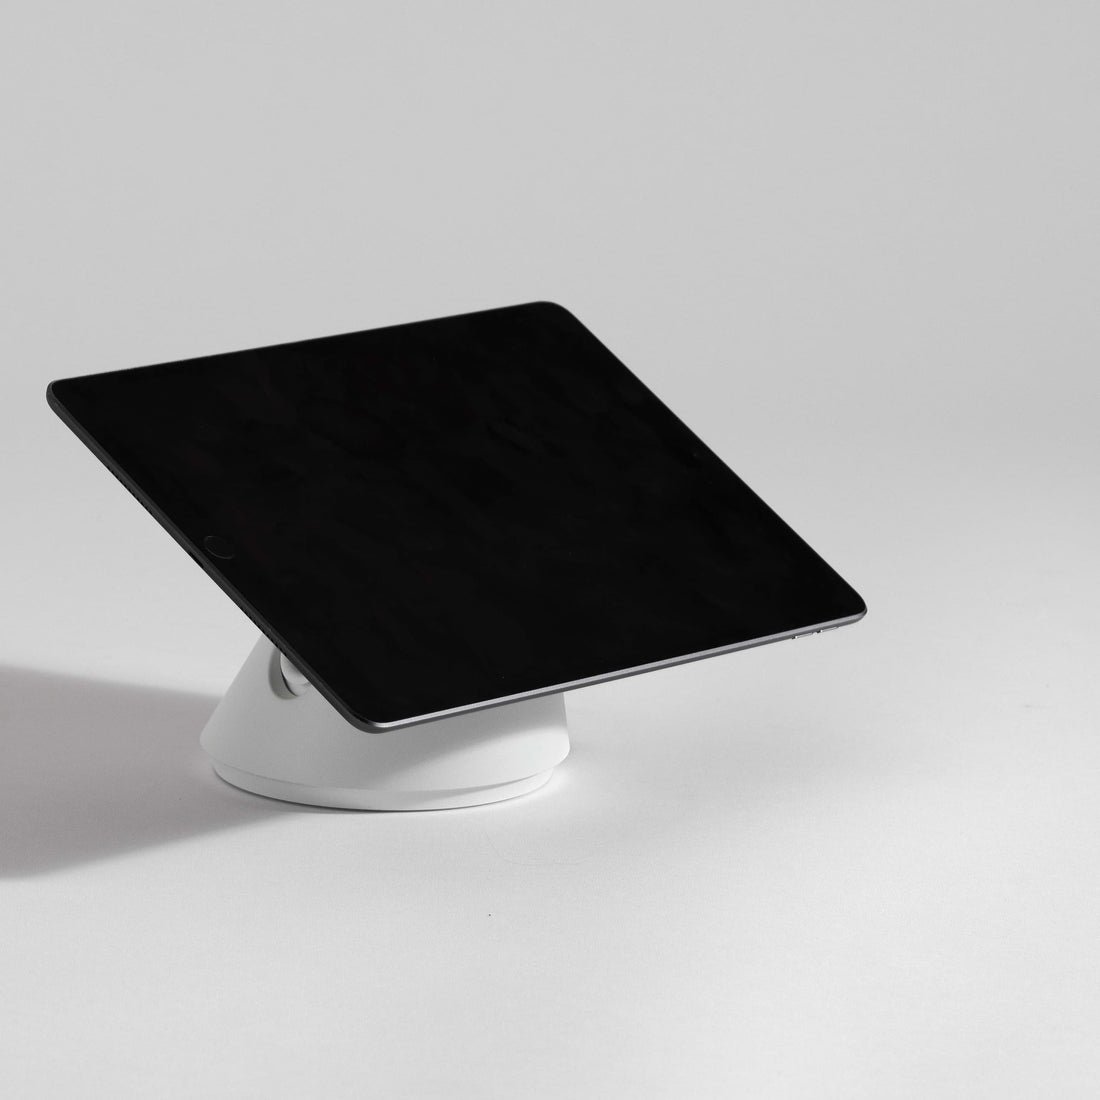 Bosstab Touch Evo Universal Floor Stand Kiosk for iPads and Tablets